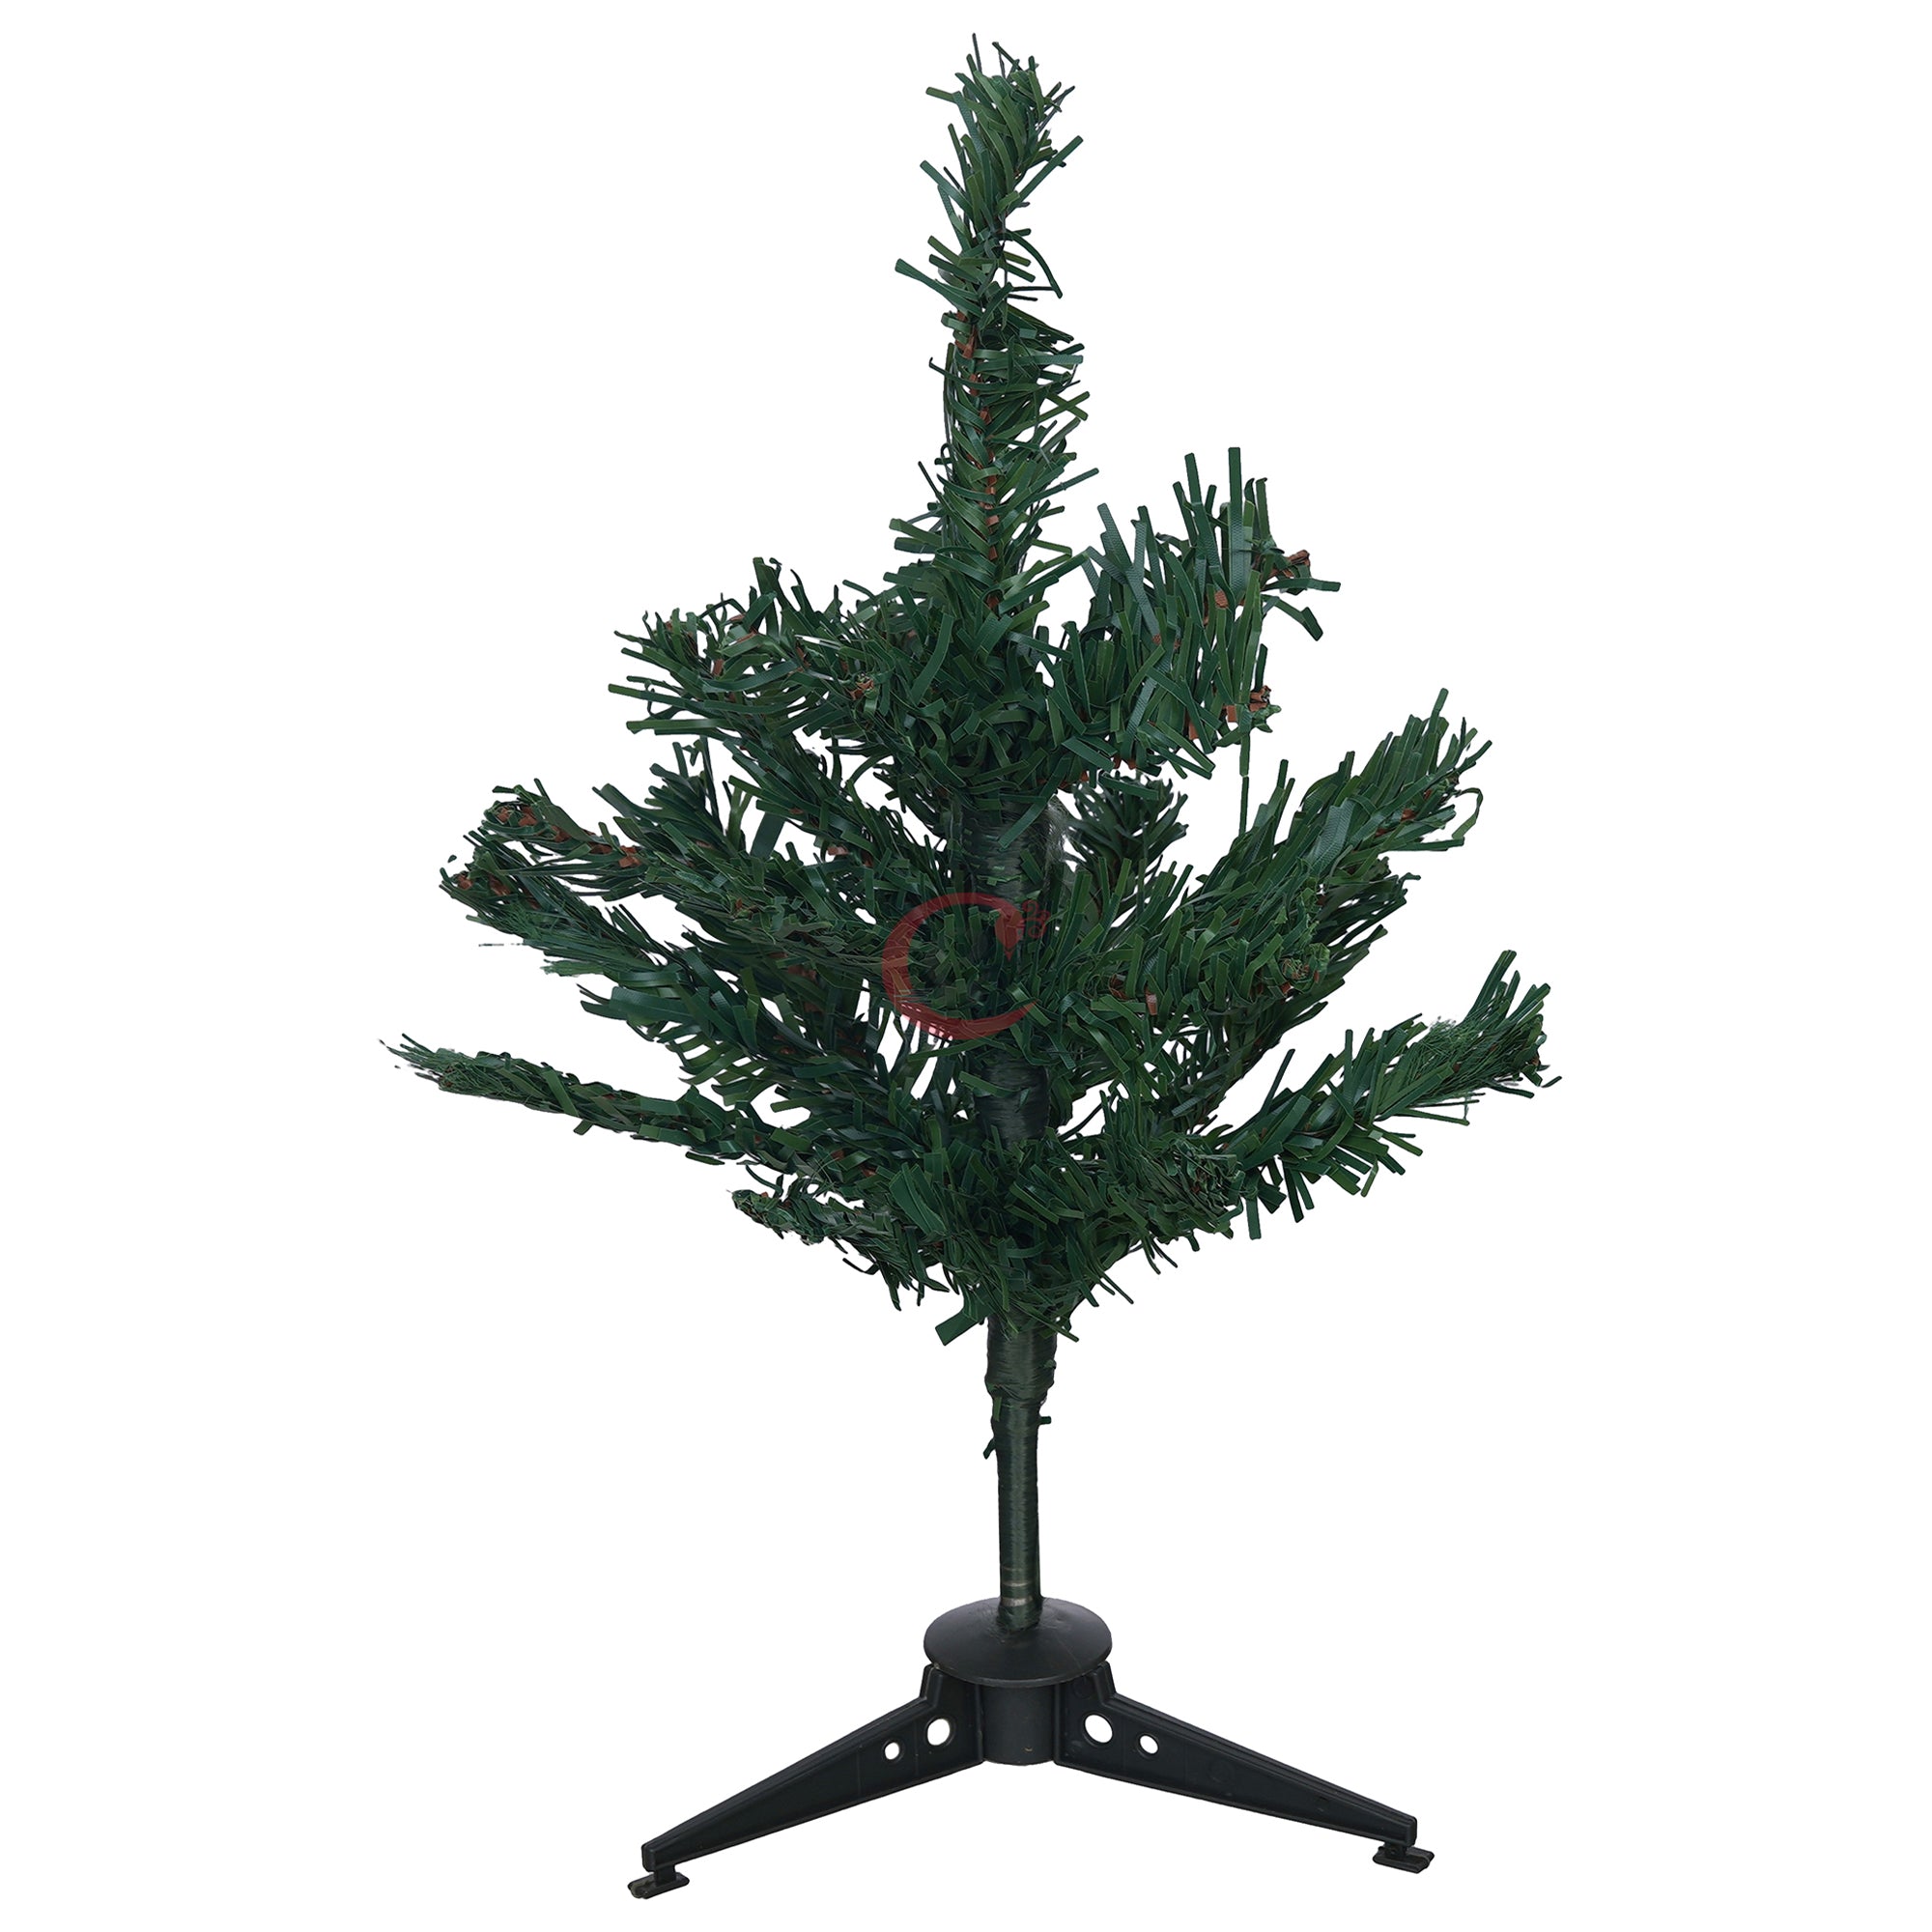 eCraftIndia 1 Feet Green Artificial Christmas Tree Xmas Pine Tree with Stand and 40 Christmas Decoration Ornaments Props - Merry Christmas Decoration Item for Home, Office, and Church 2